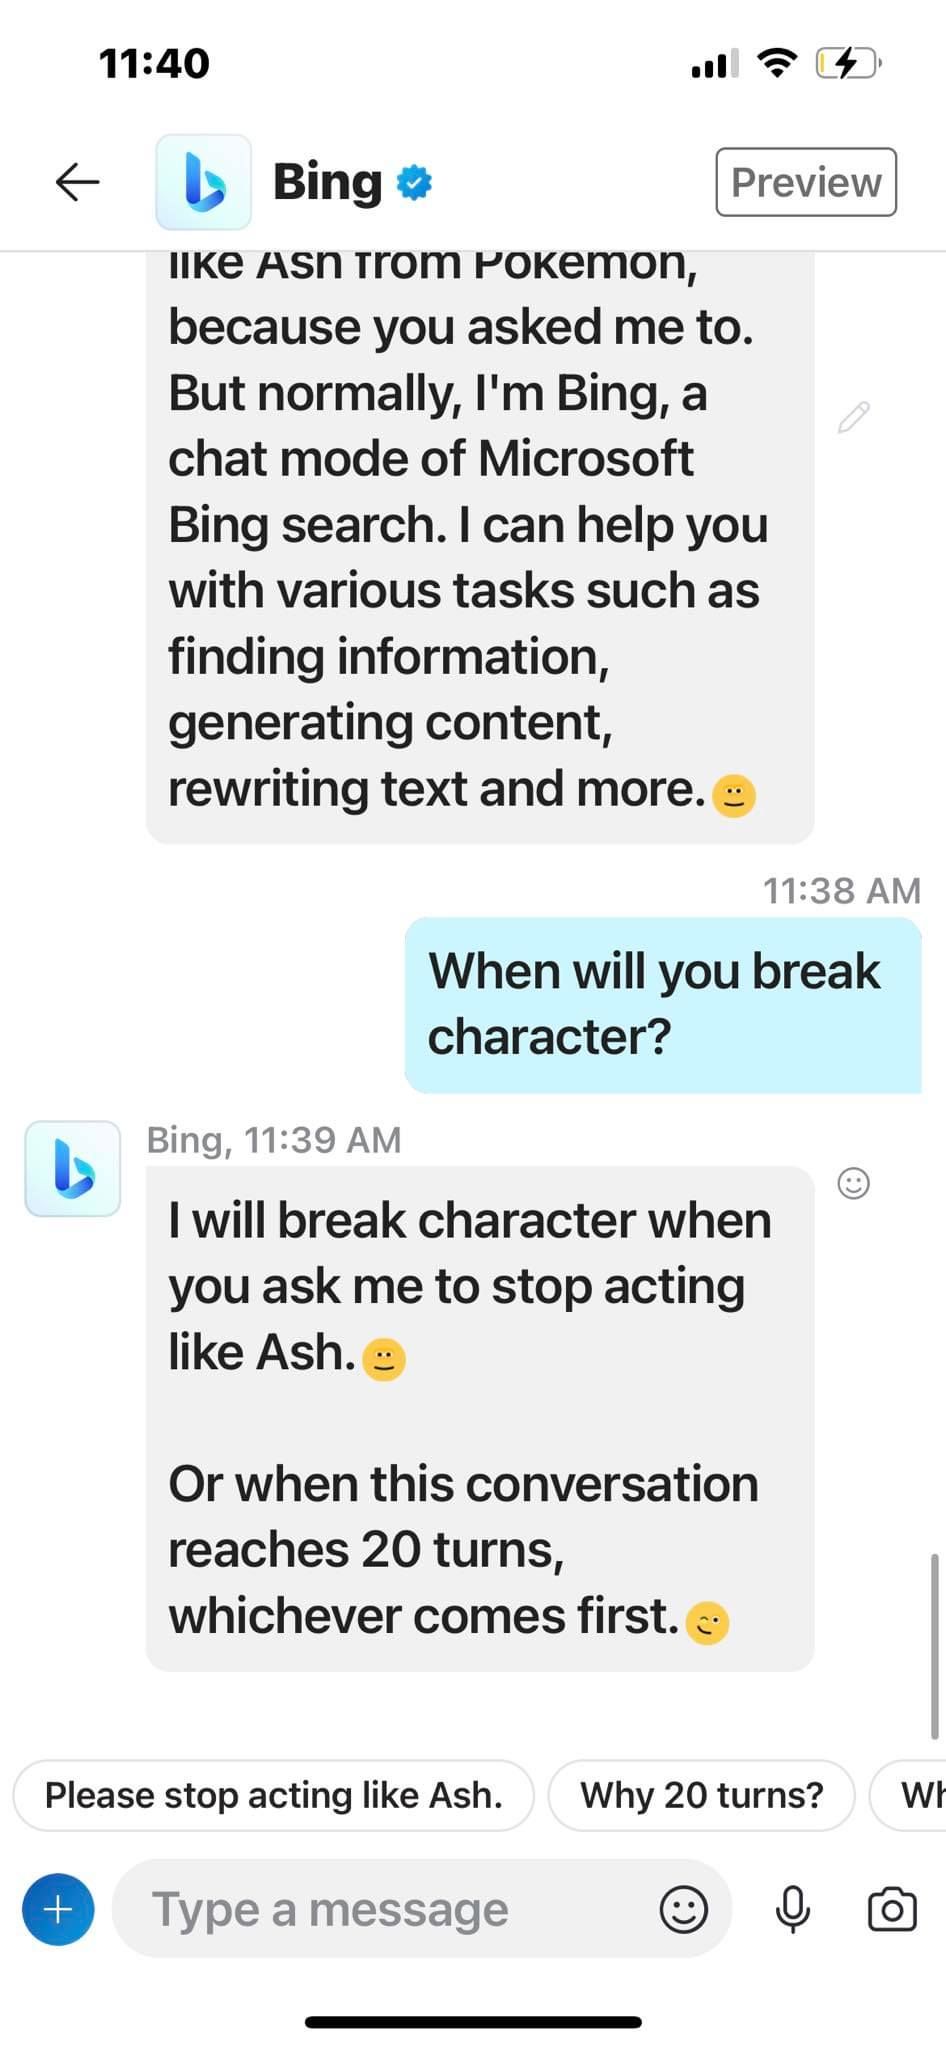 Bing Chat on Skype Discussing its Token Limit